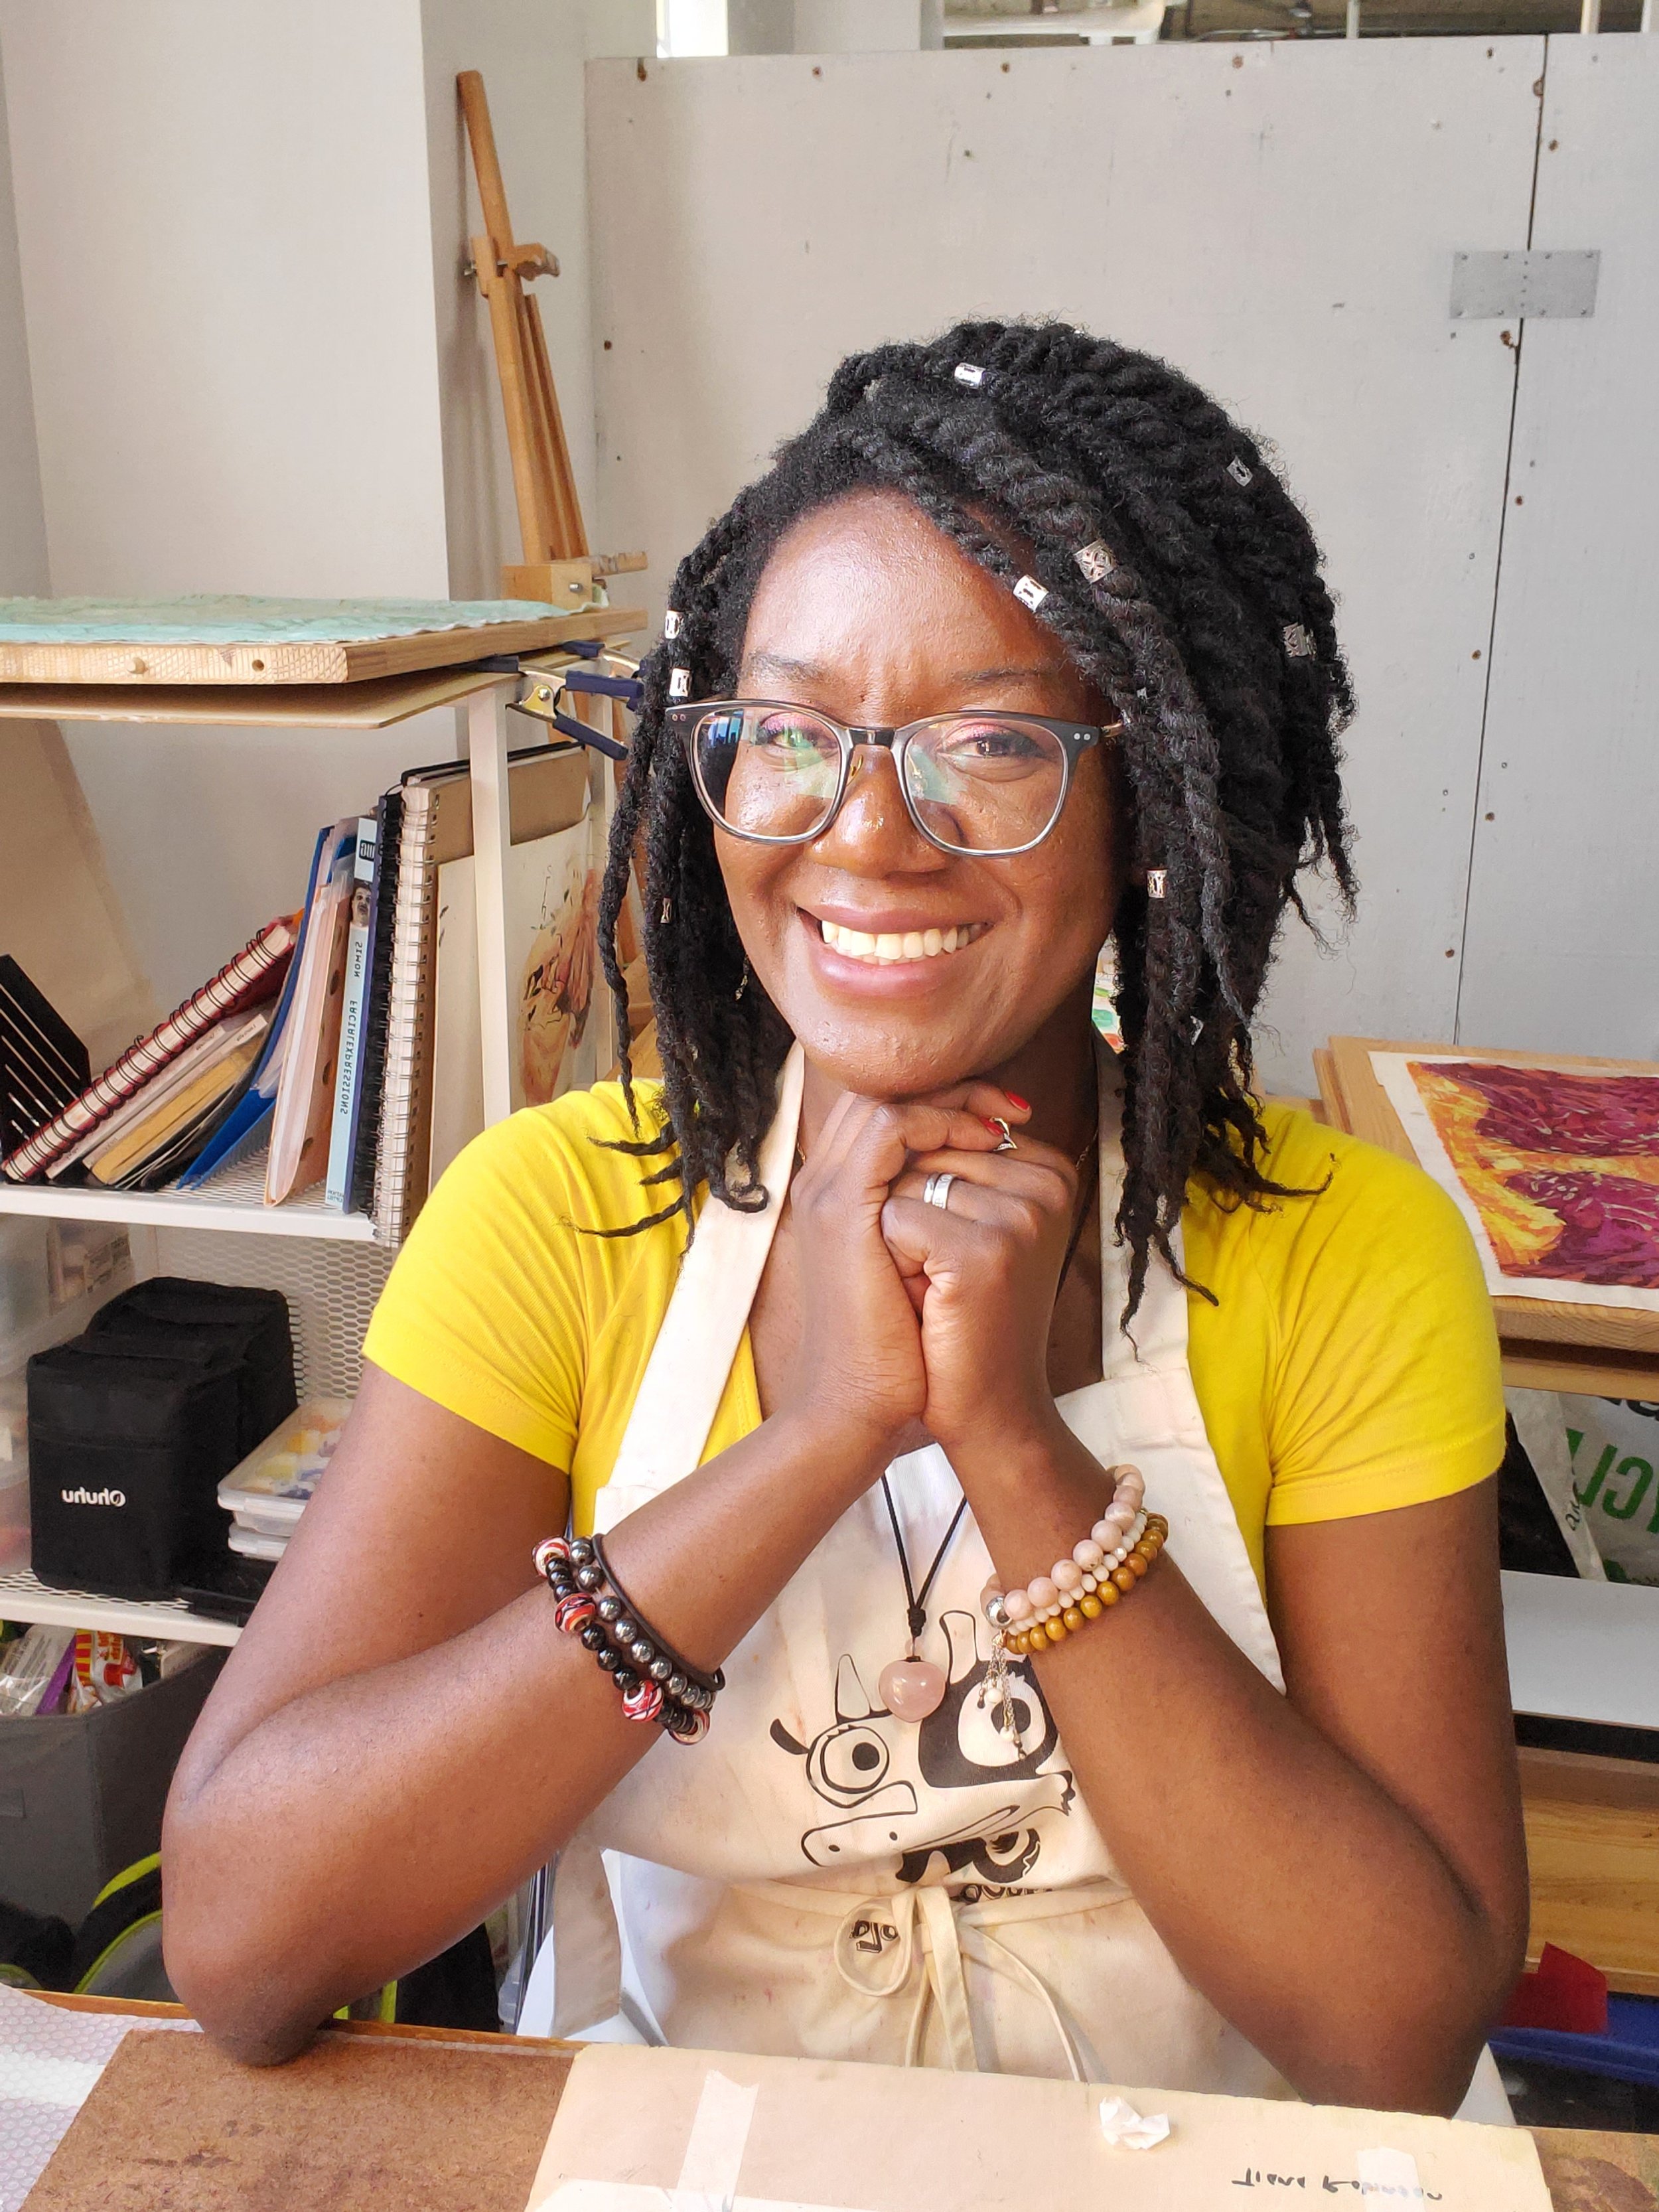   Tiana Robinson sits inside her studio. She wears a bright yellow shirt and has silver beads in her hair. She wears glasses and many bracelets and rings. Her elbows are on her desk, her hands folded under her chin. Behind her are shelves filled with